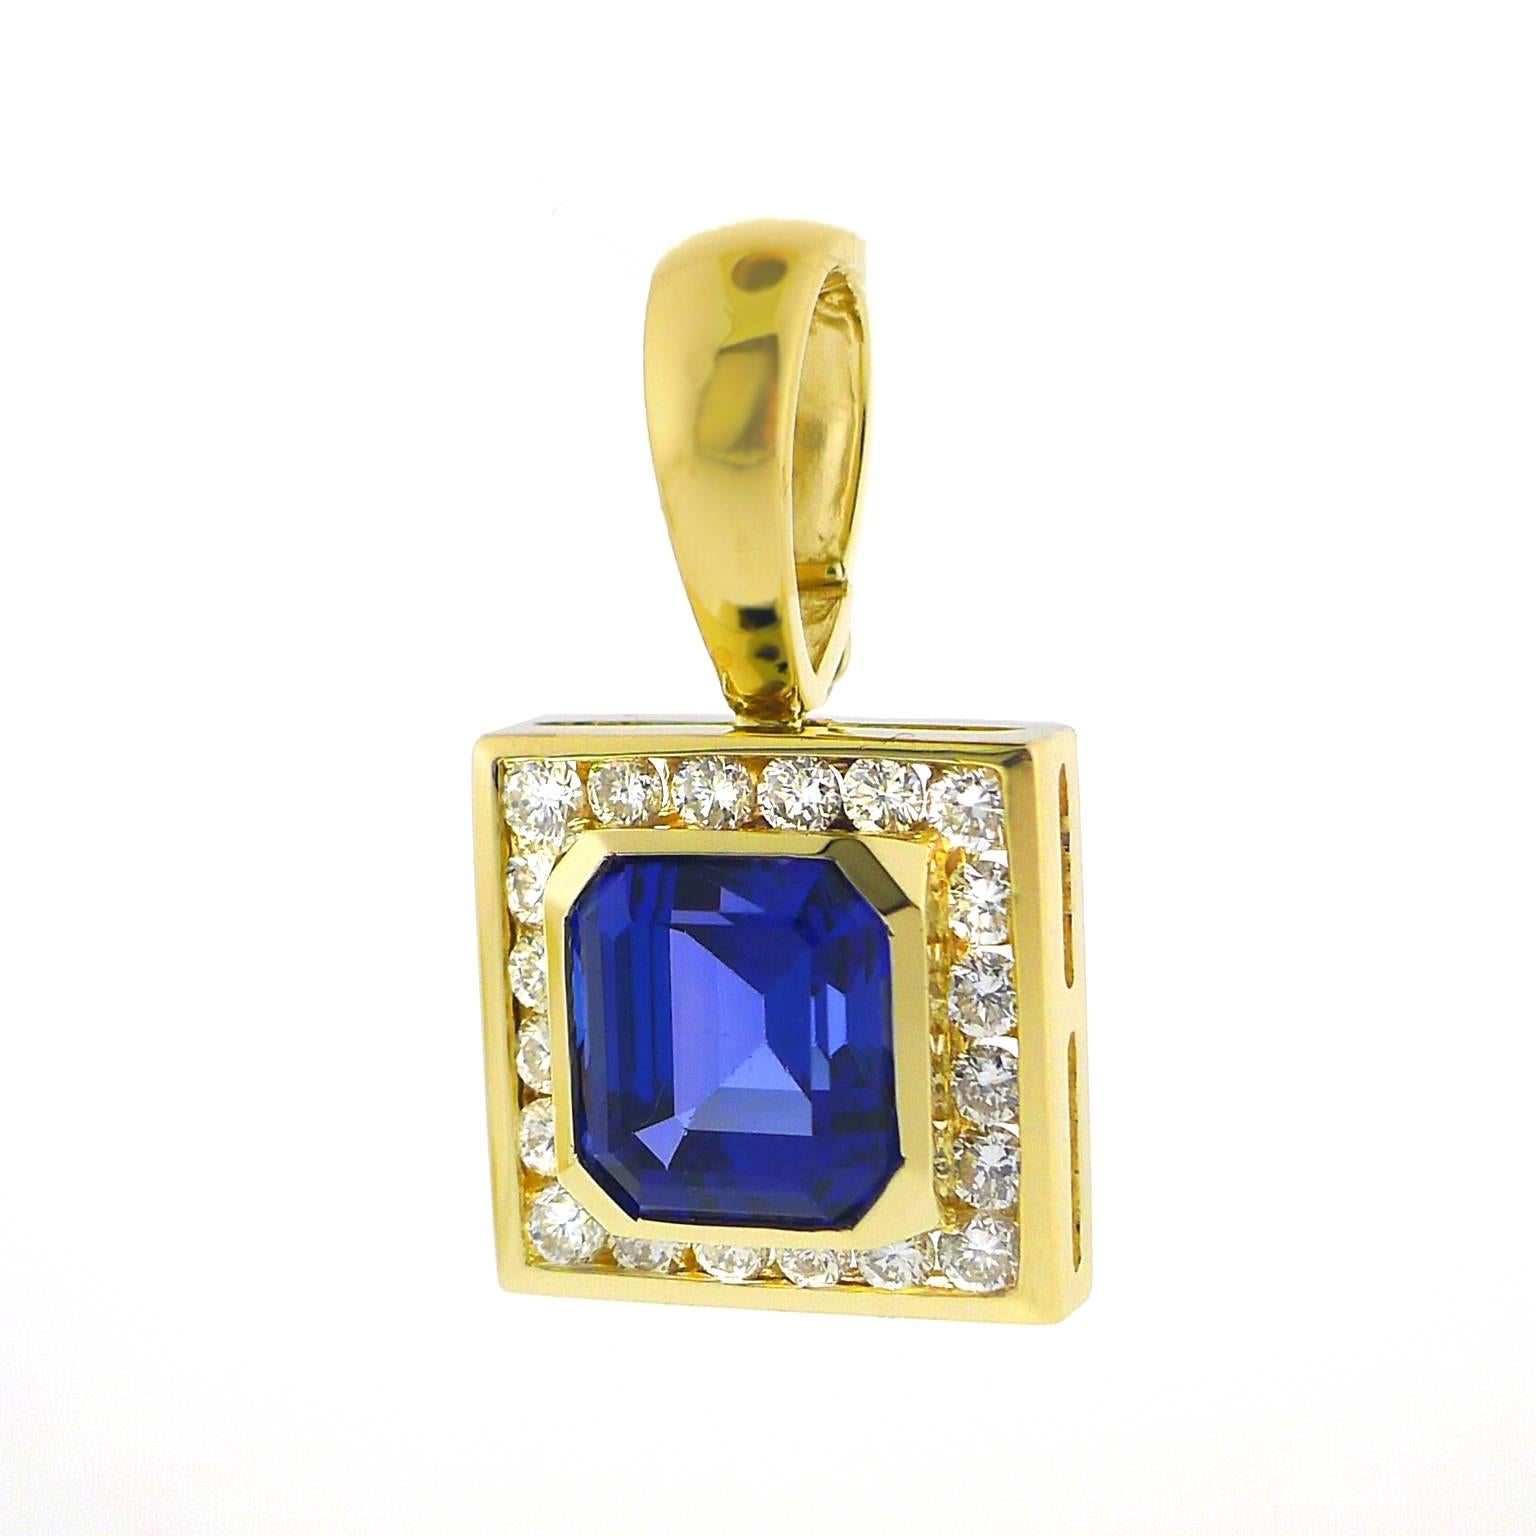 A gem-quality 8.5 millimeter by 10 millimeter rectangular tanzanite with cut corners is bezel set into 14 karat yellow gold, and surrounded by 20 channel set round brilliant cut diamonds weighing approximately five points each and totaling